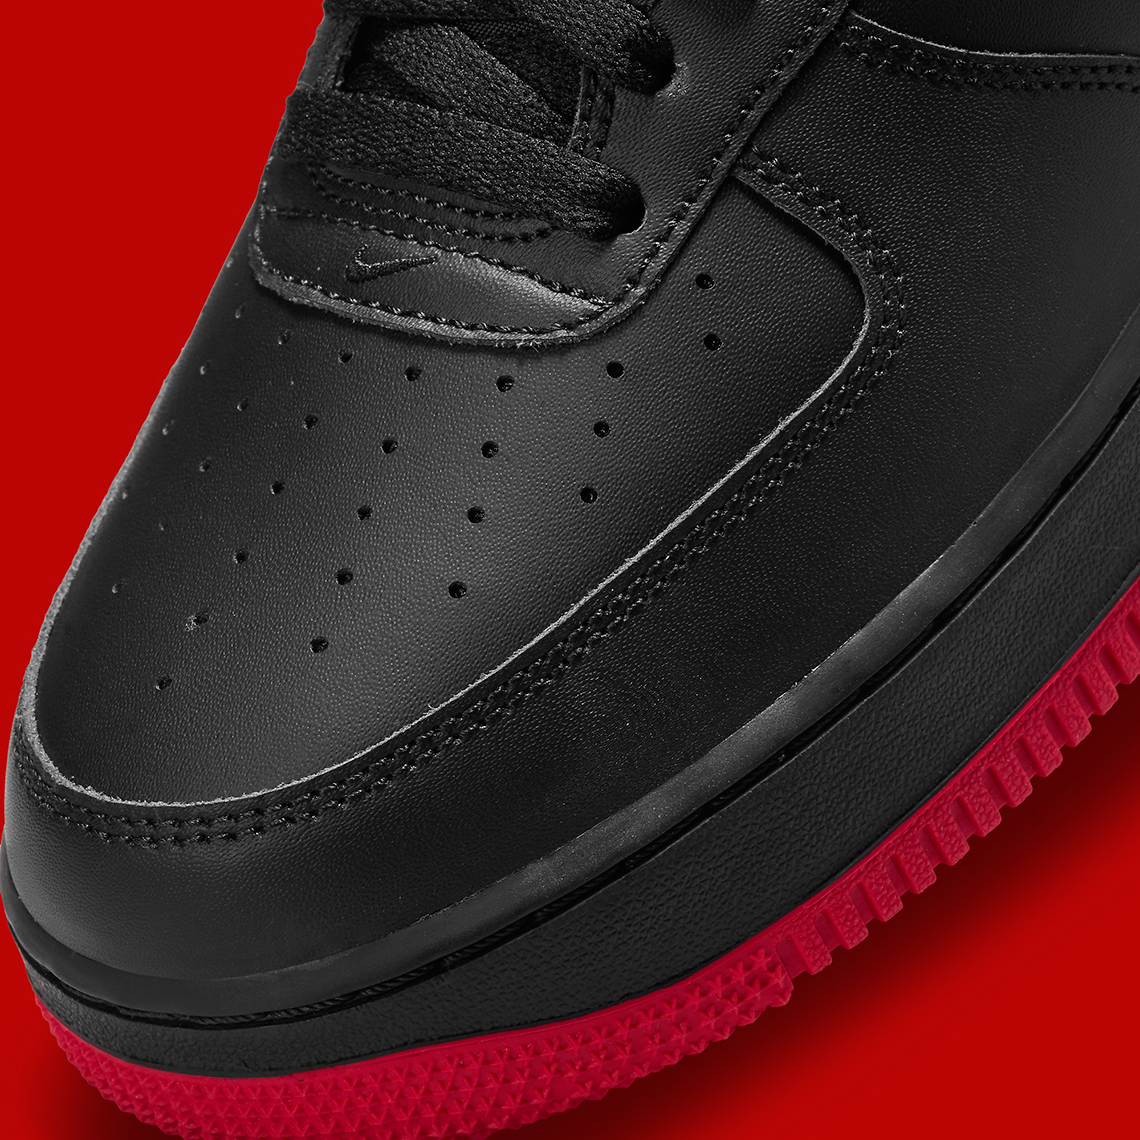 nike air force one red and black